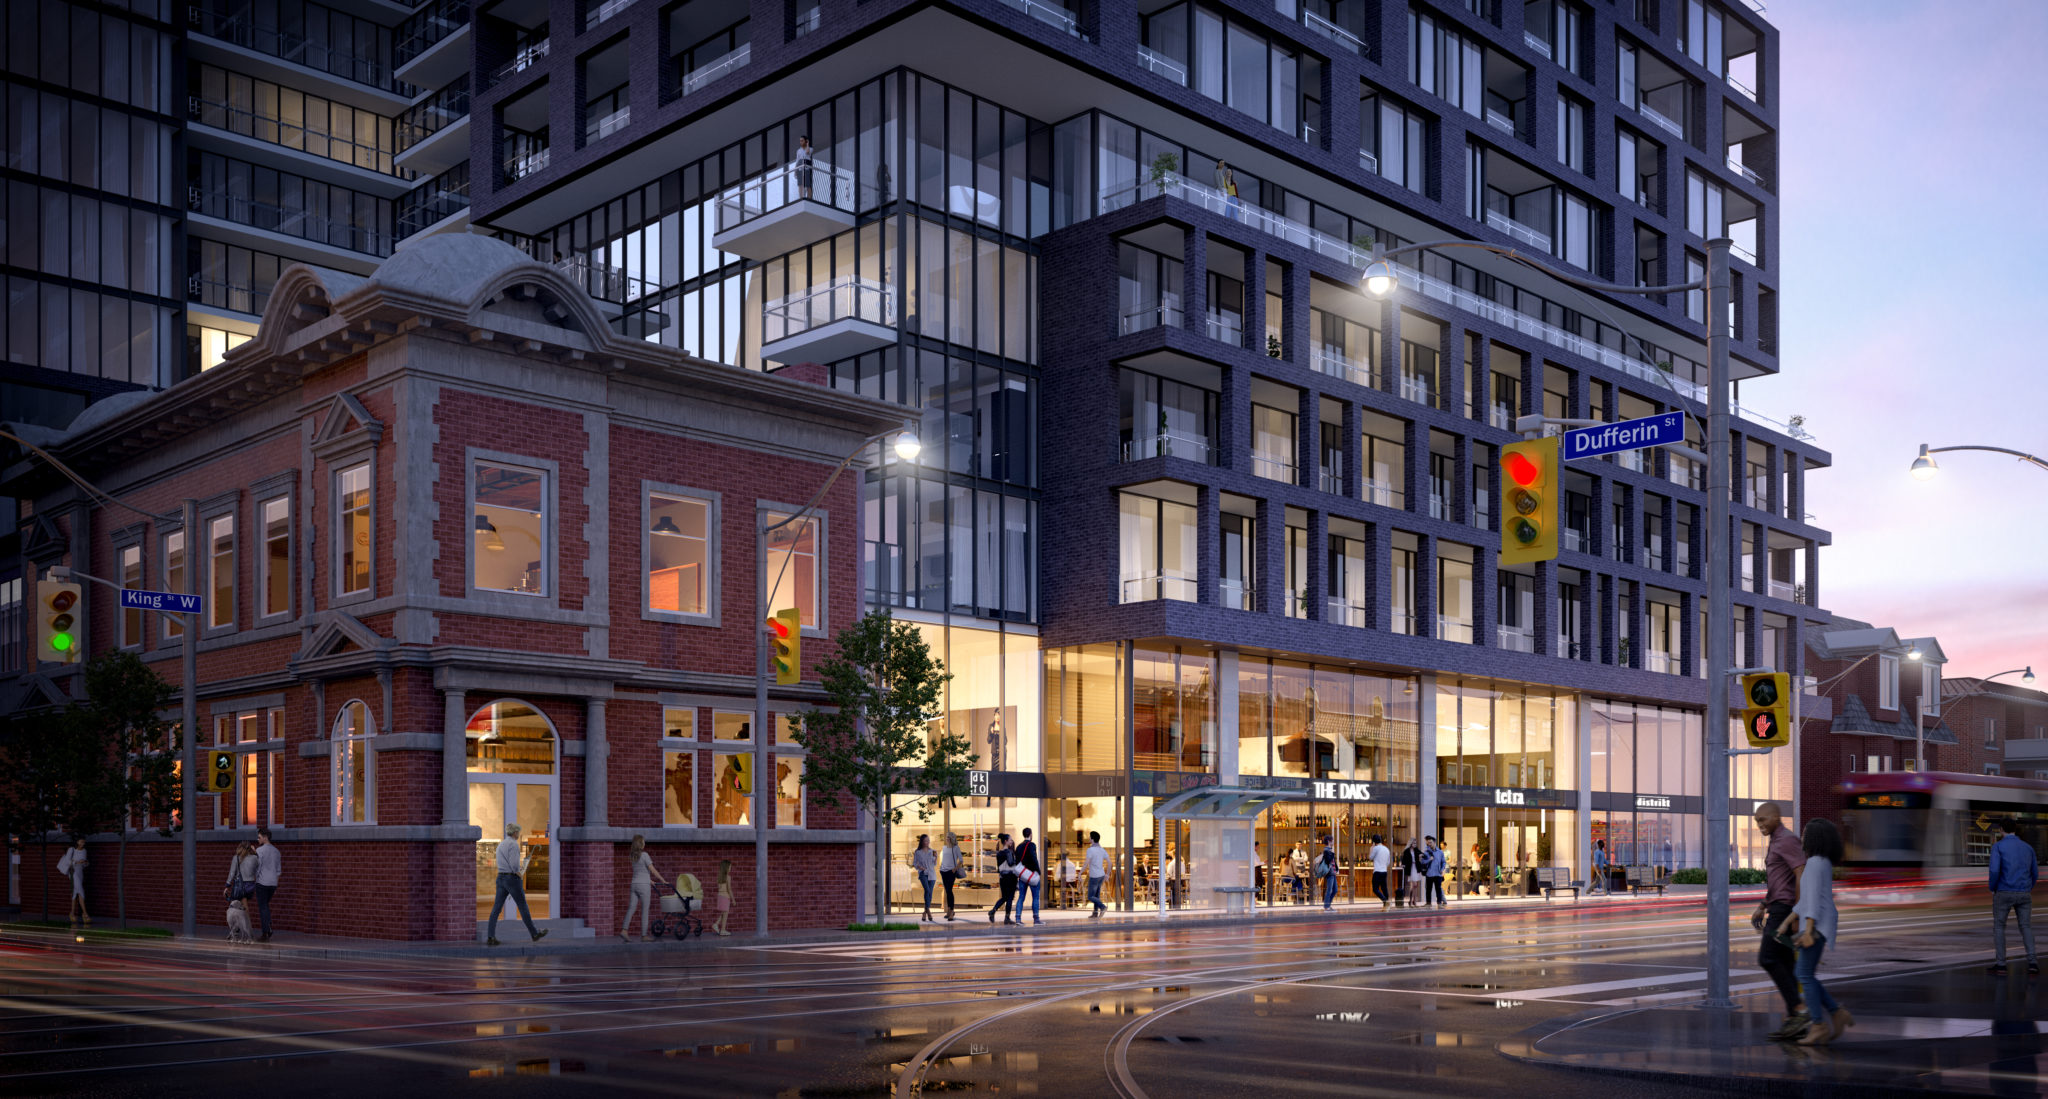 Another 3D image of XO Condos showing its location on King St W and Dufferin.